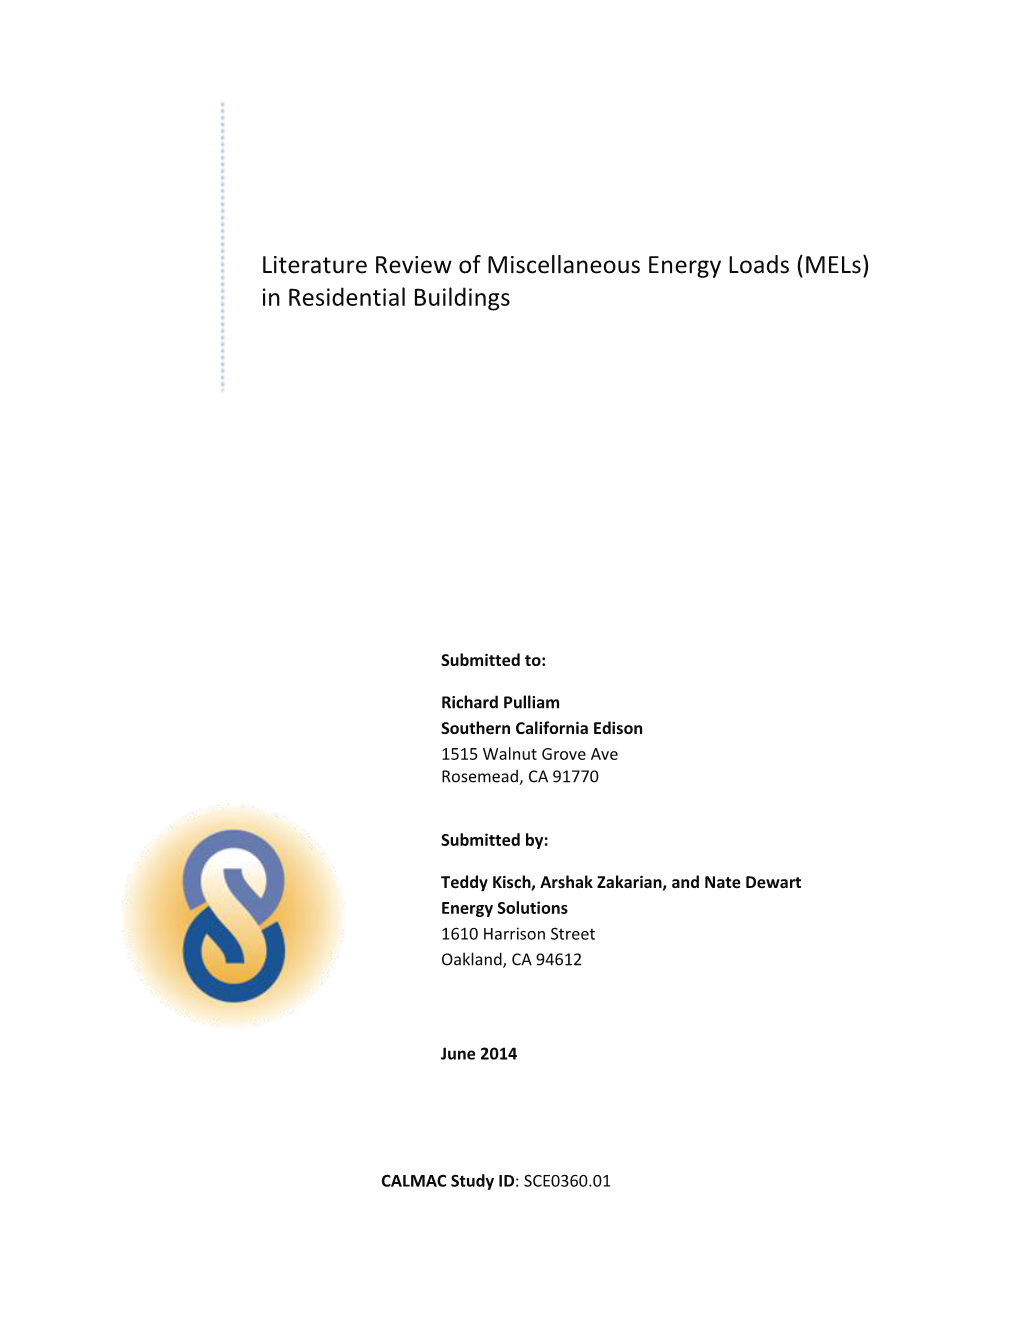 Literature Review of Miscellaneous Energy Loads (Mels) in Residential Buildings